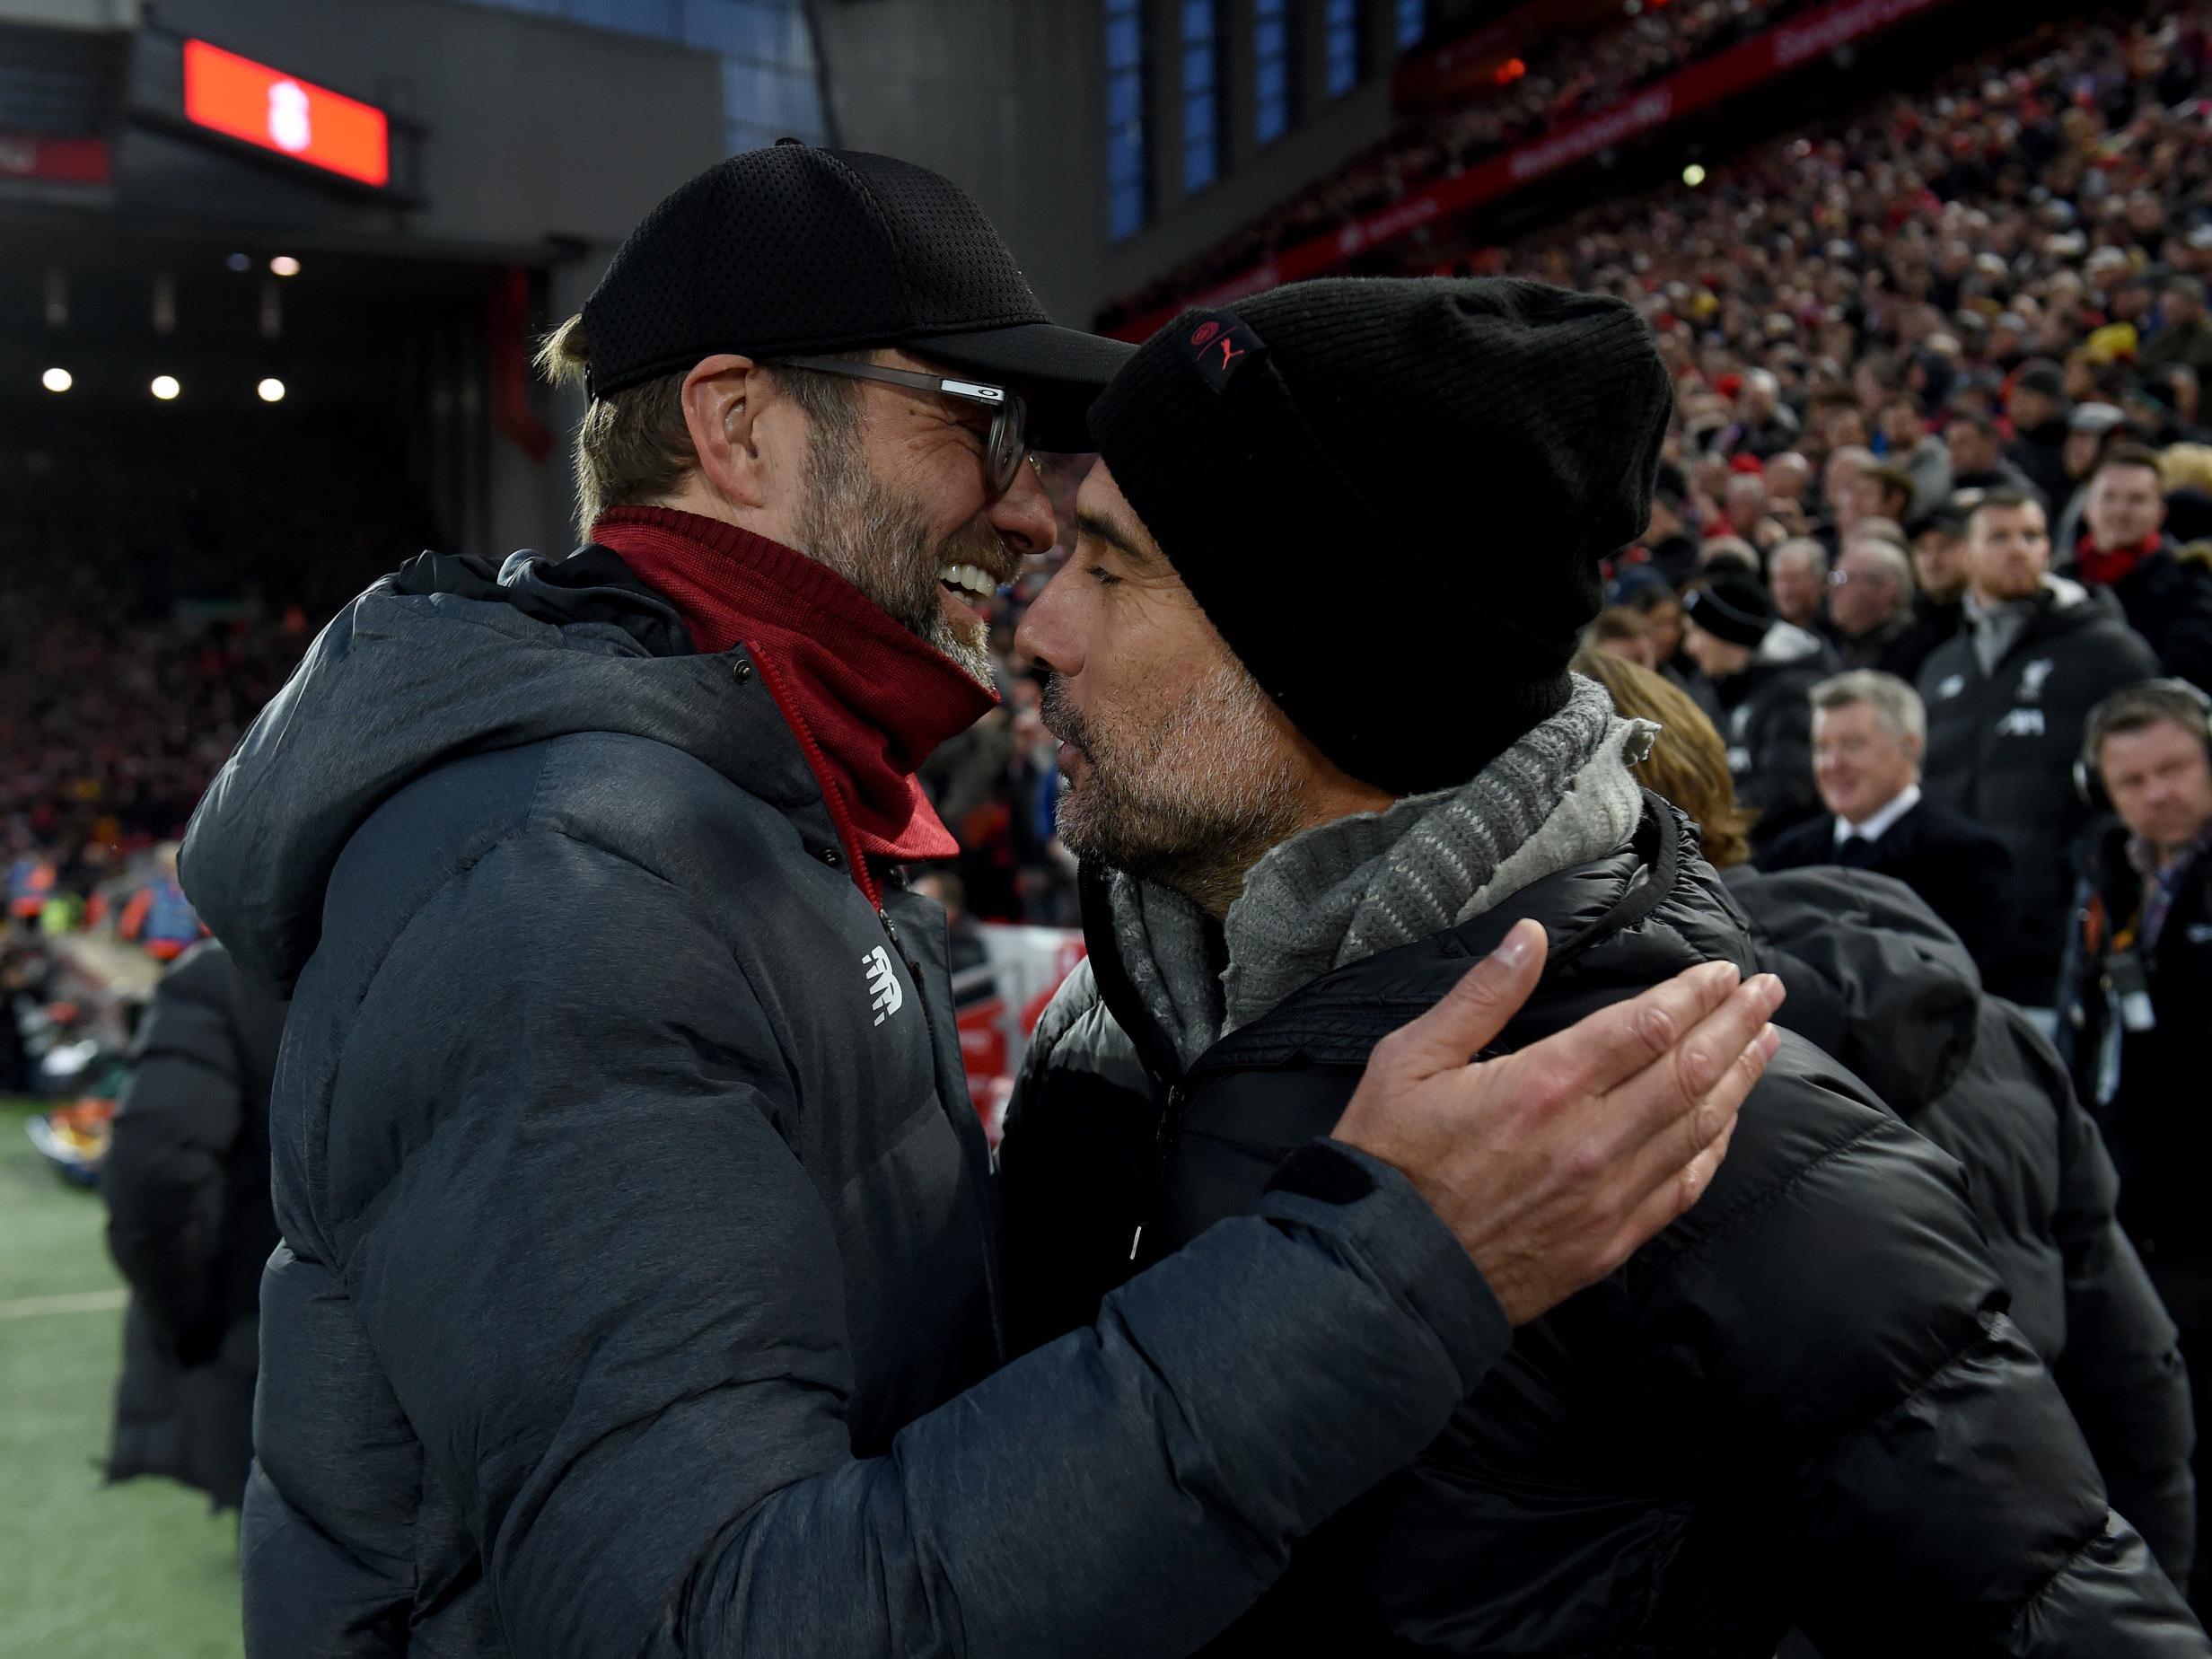 Guardiola and Klopp have raised the bar in English football